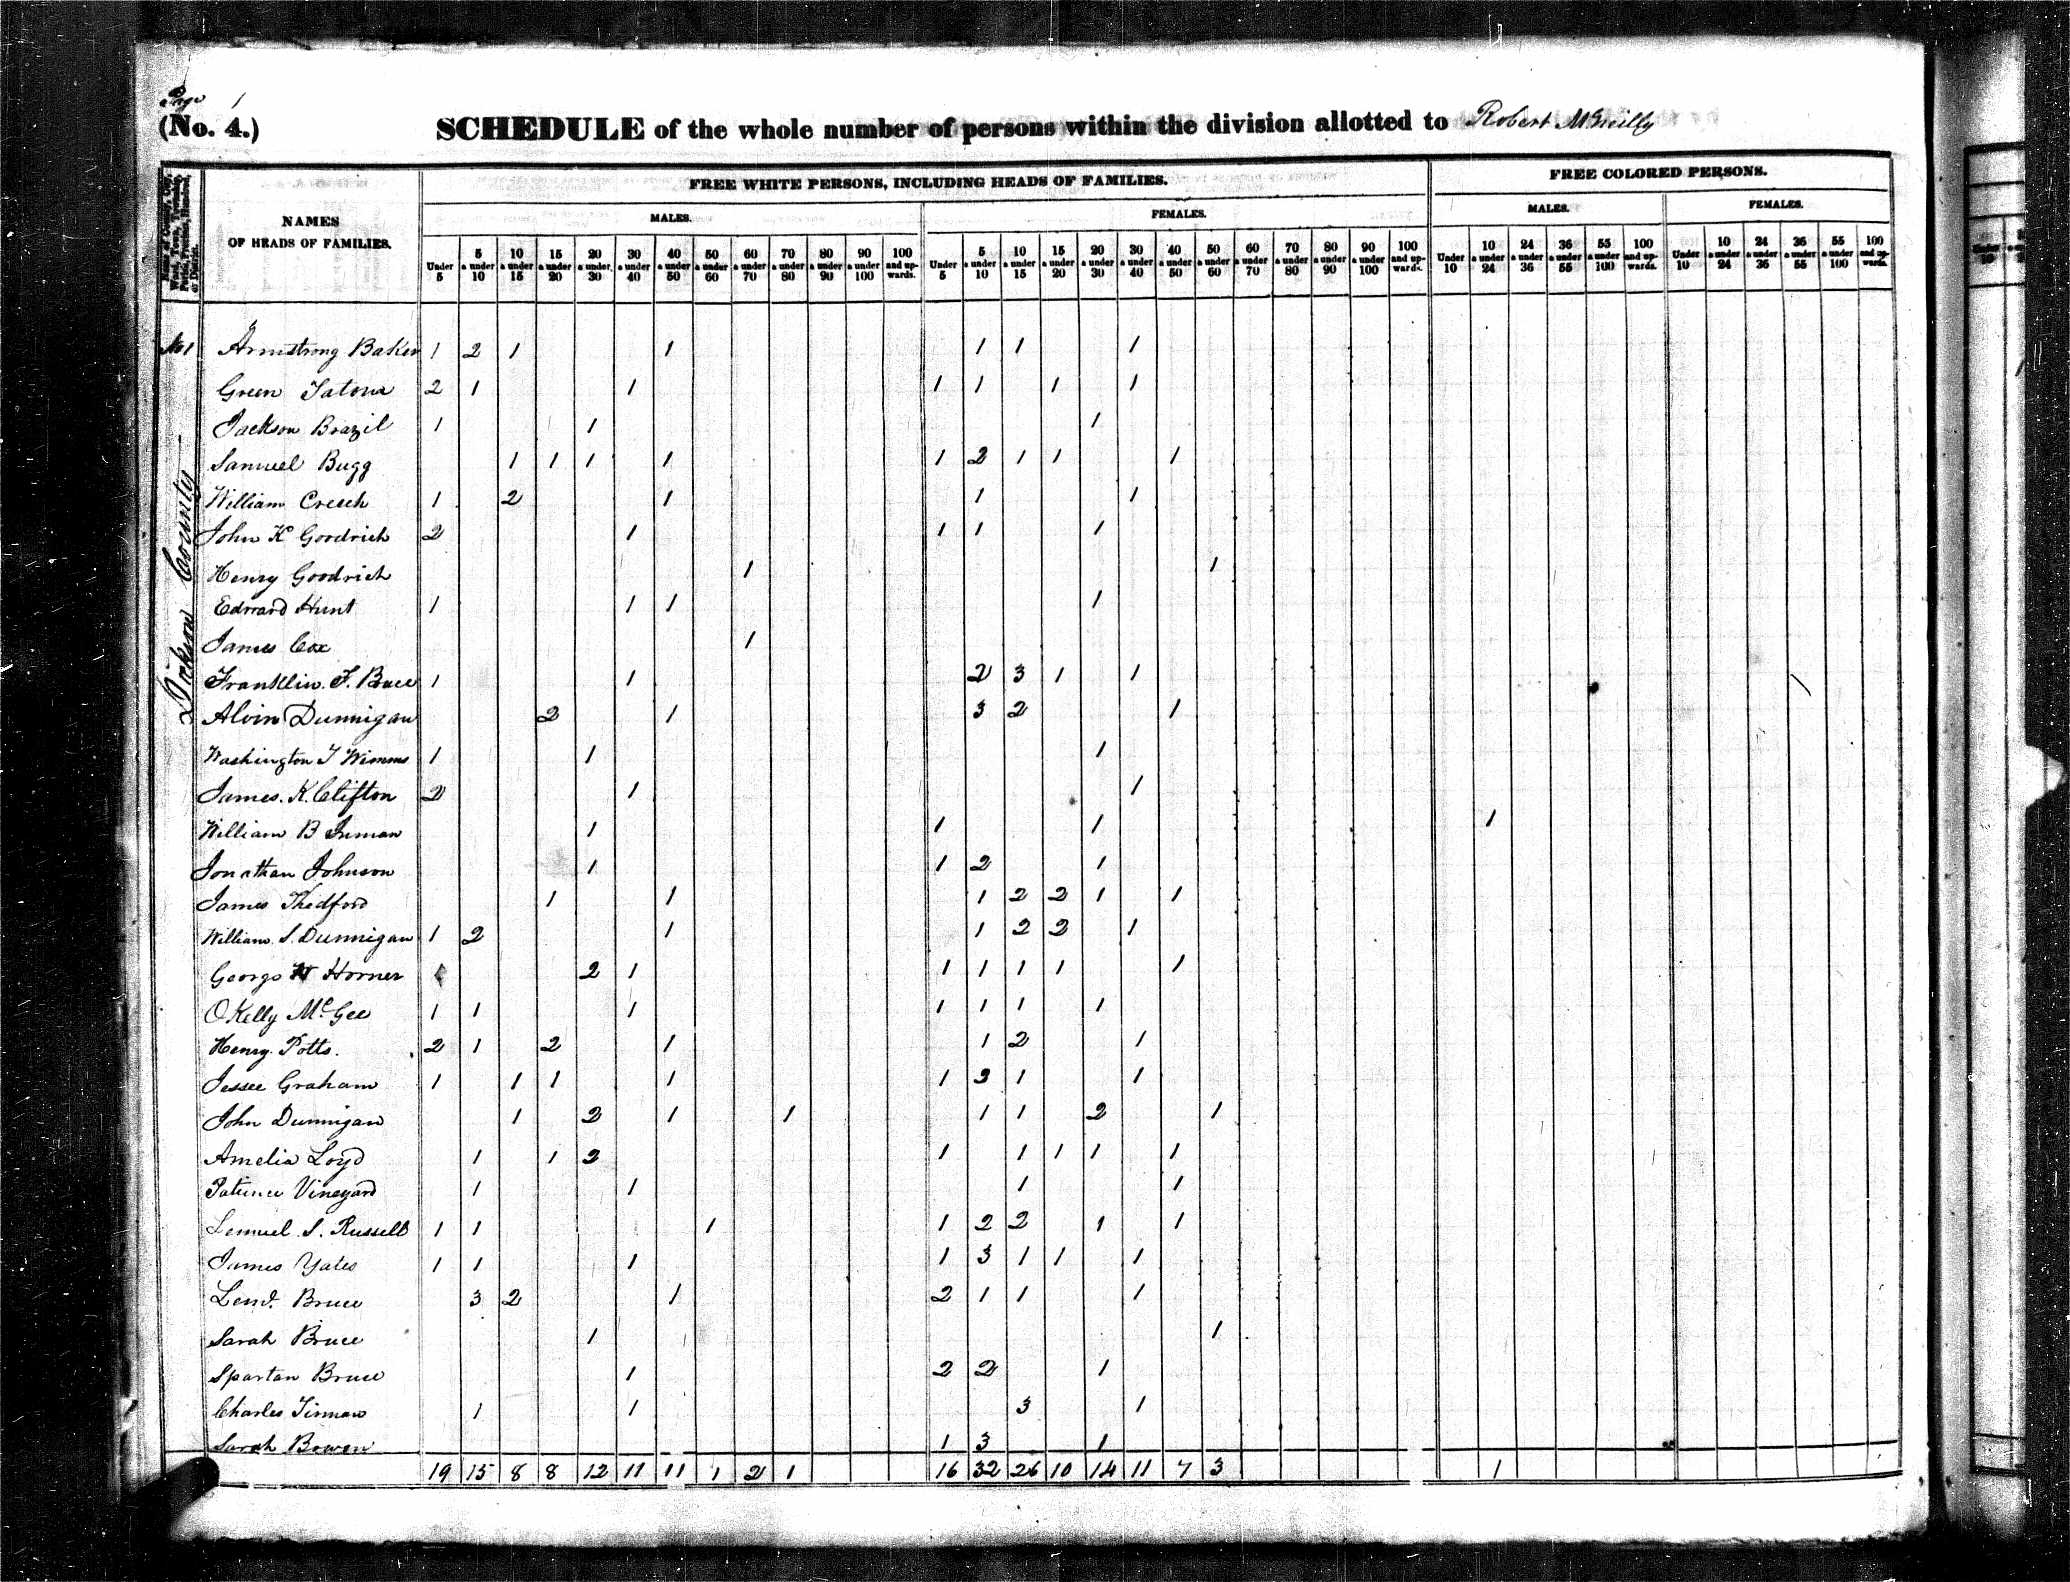 Jackson Brazzell, 1840 Dickson County, Tennessee, census